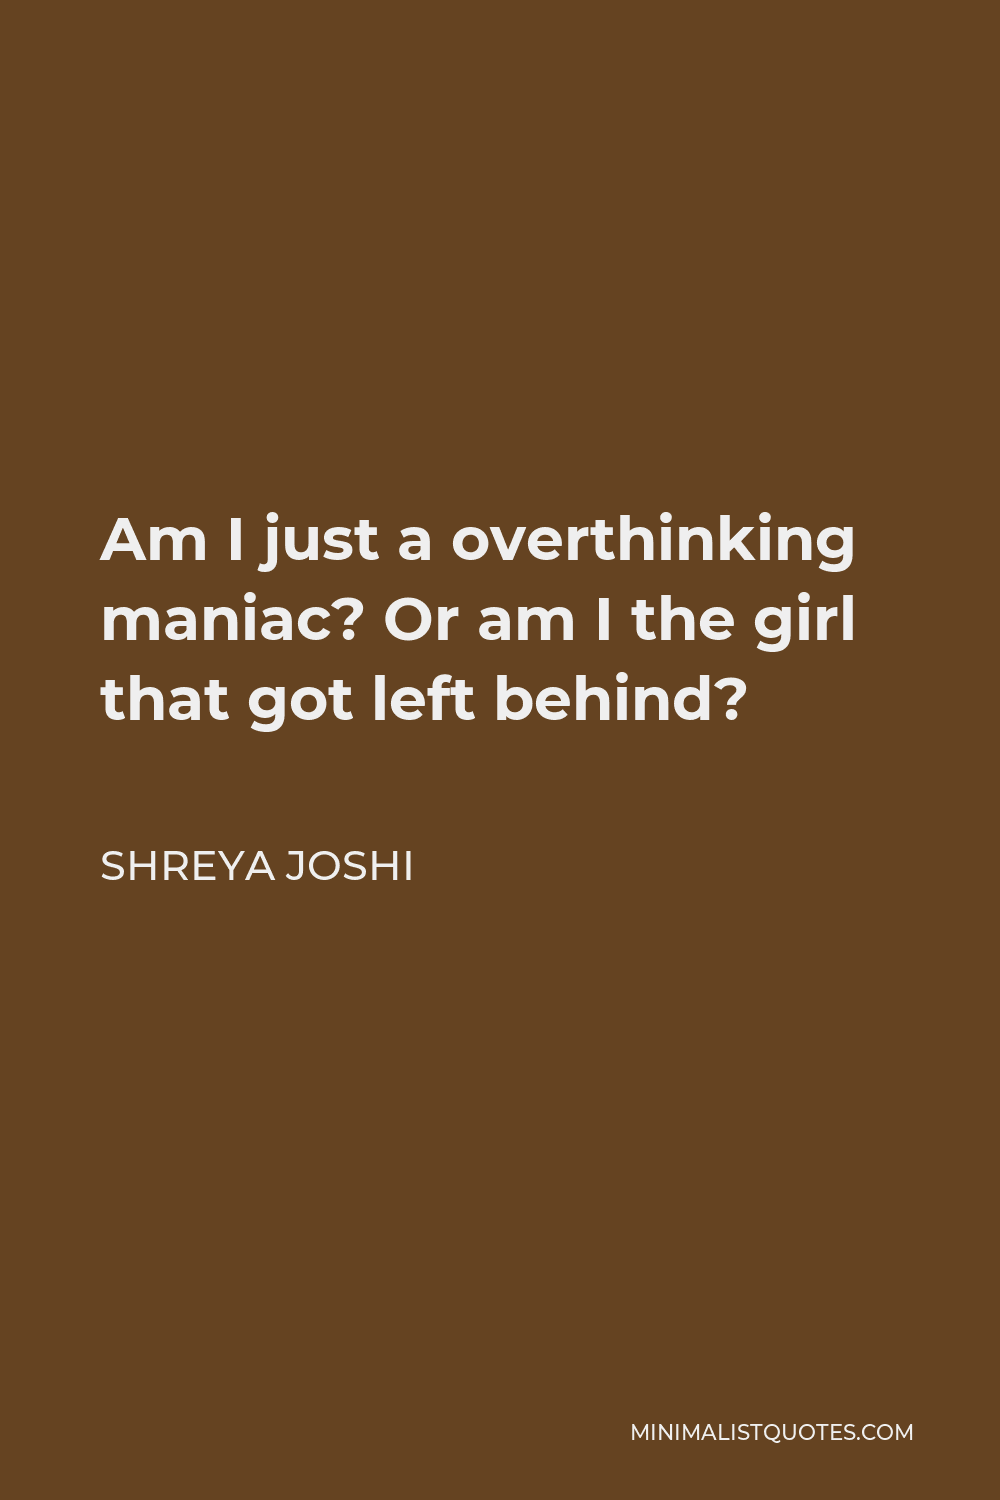 Shreya Joshi Quote - Am I just a overthinking maniac? Or am I the girl that got left behind?